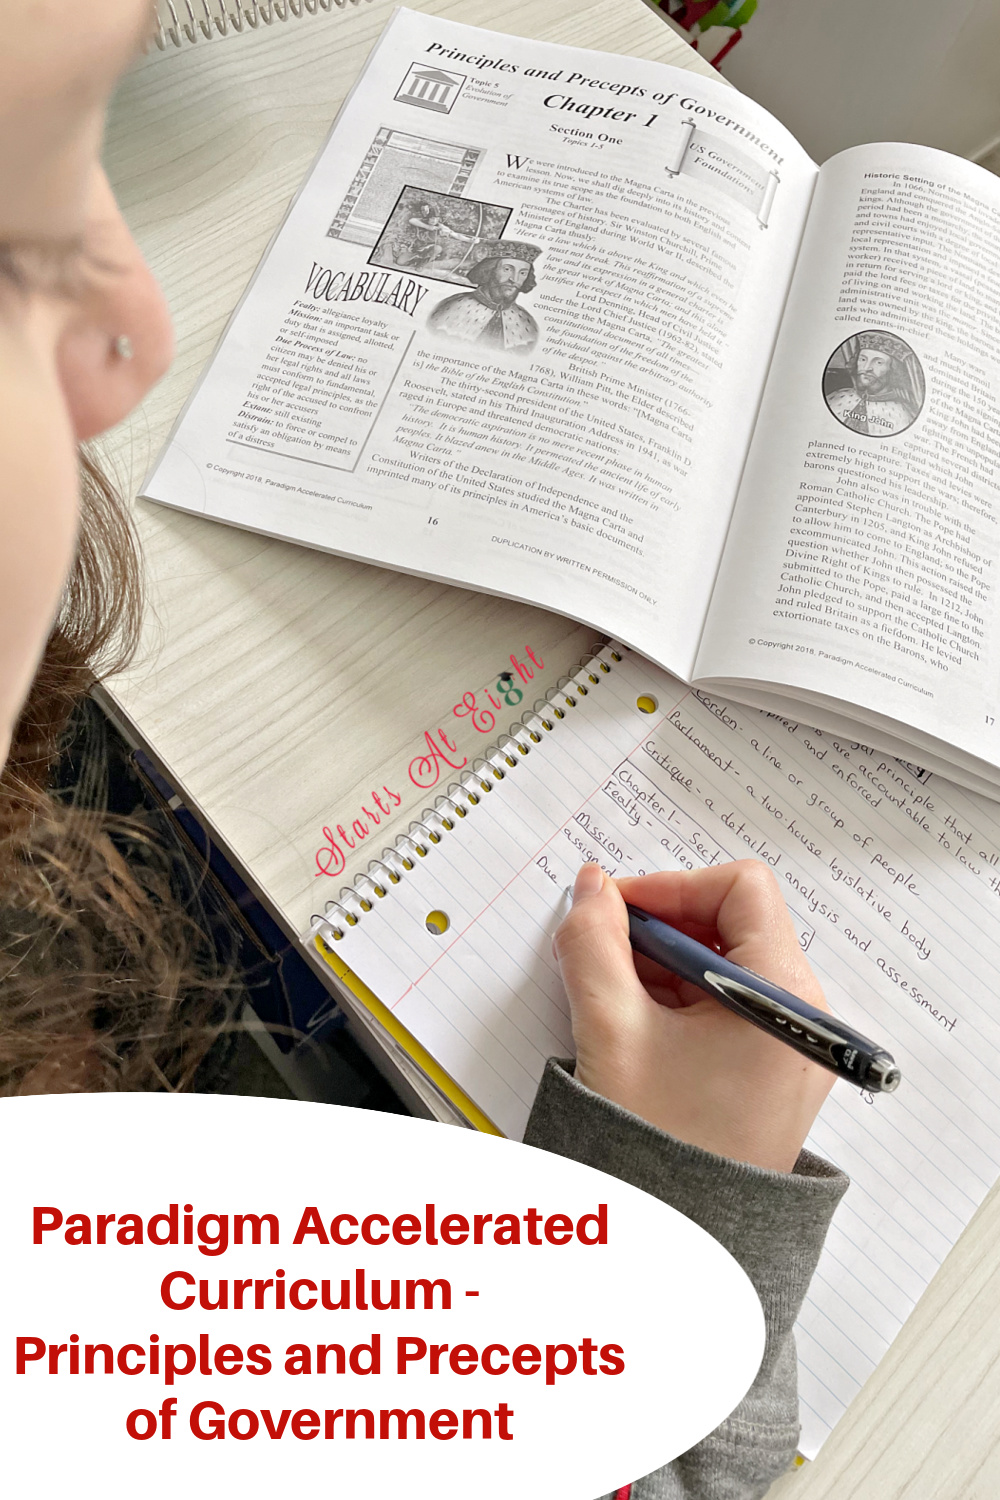 Paradigm Accelerated Curriculum's 1/2 credit Homeschool High School Government Curriculum includes text, student workbook, and quizzes/tests making it easy to implement in your homeschool. A review from Starts At Eight